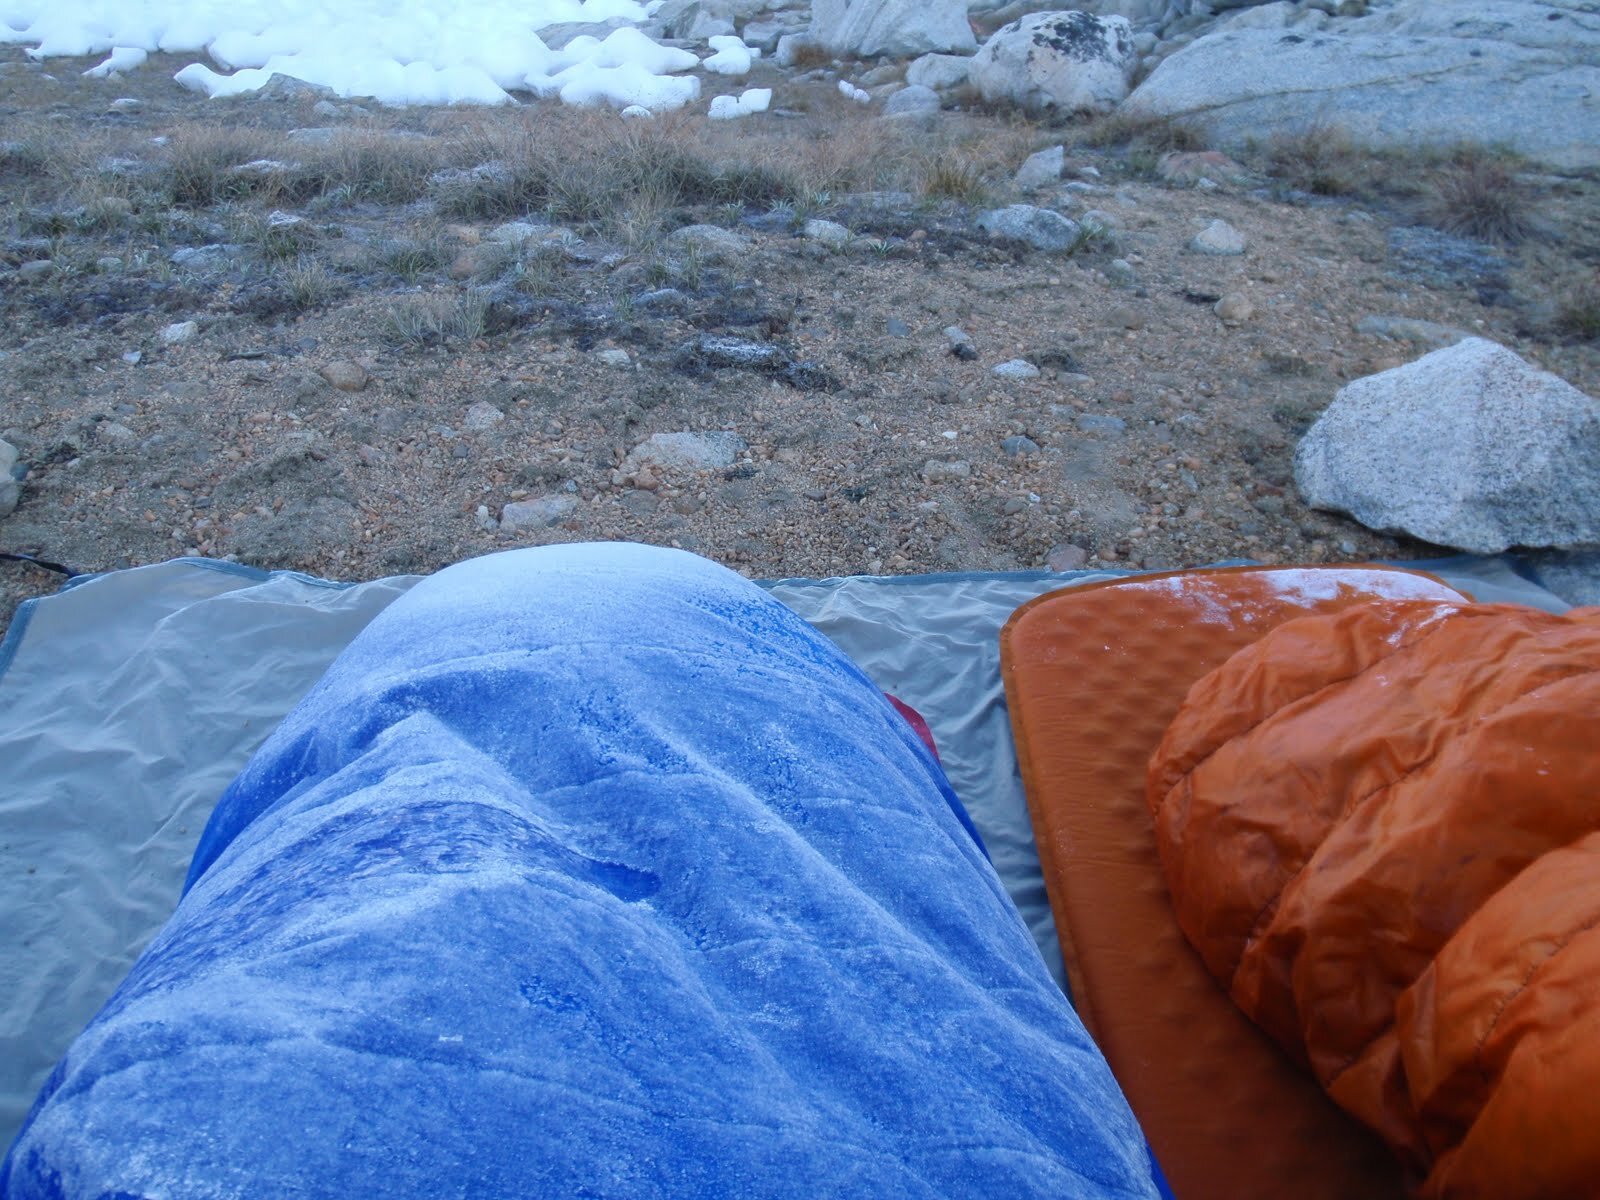 Icy sleeping bags in the morning